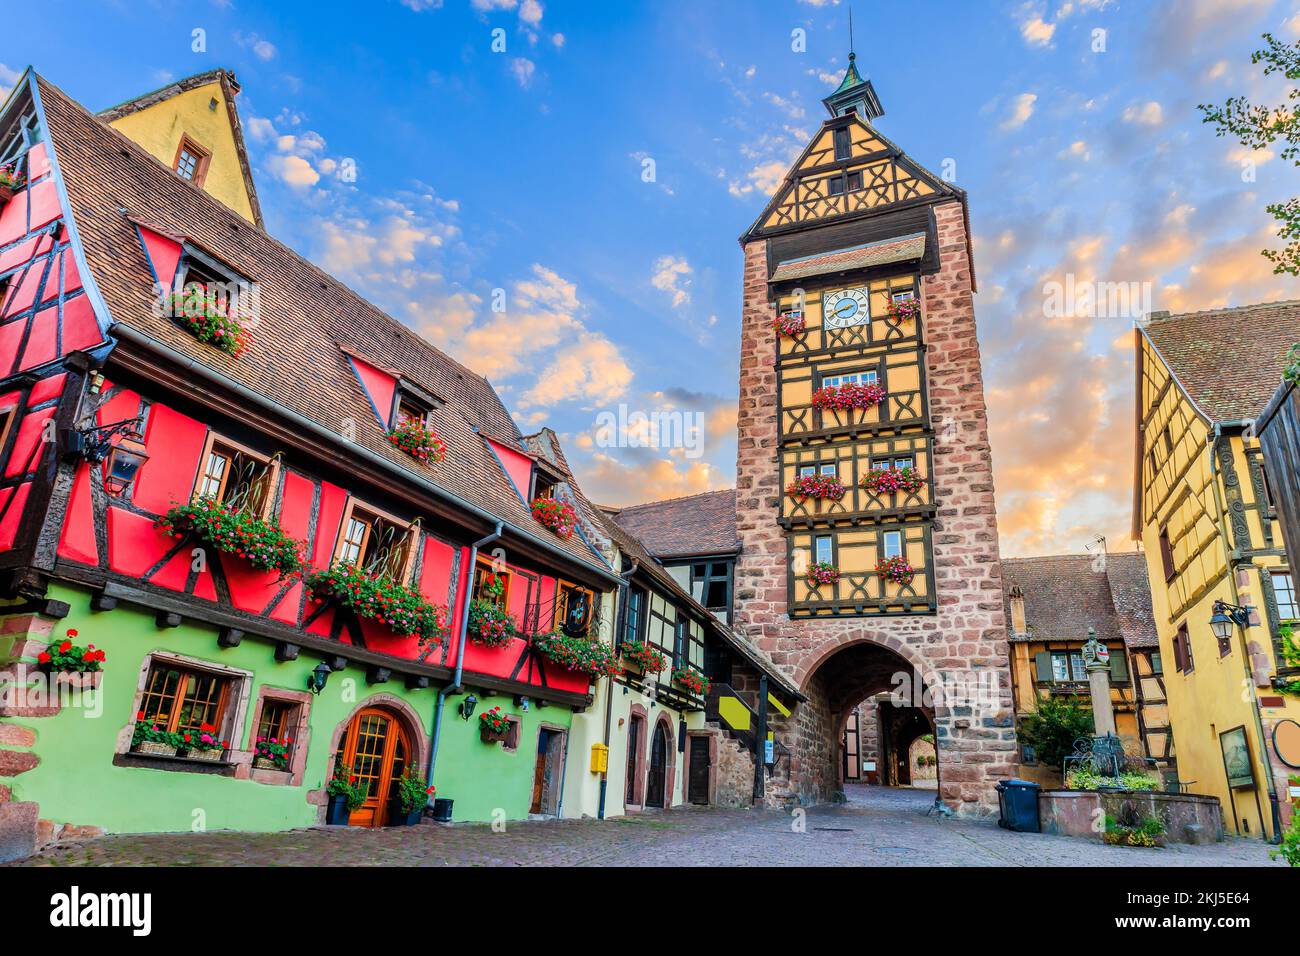 Riquewihr, Alsace. France. Picturesque street with traditional half timbered houses. Stock Photo